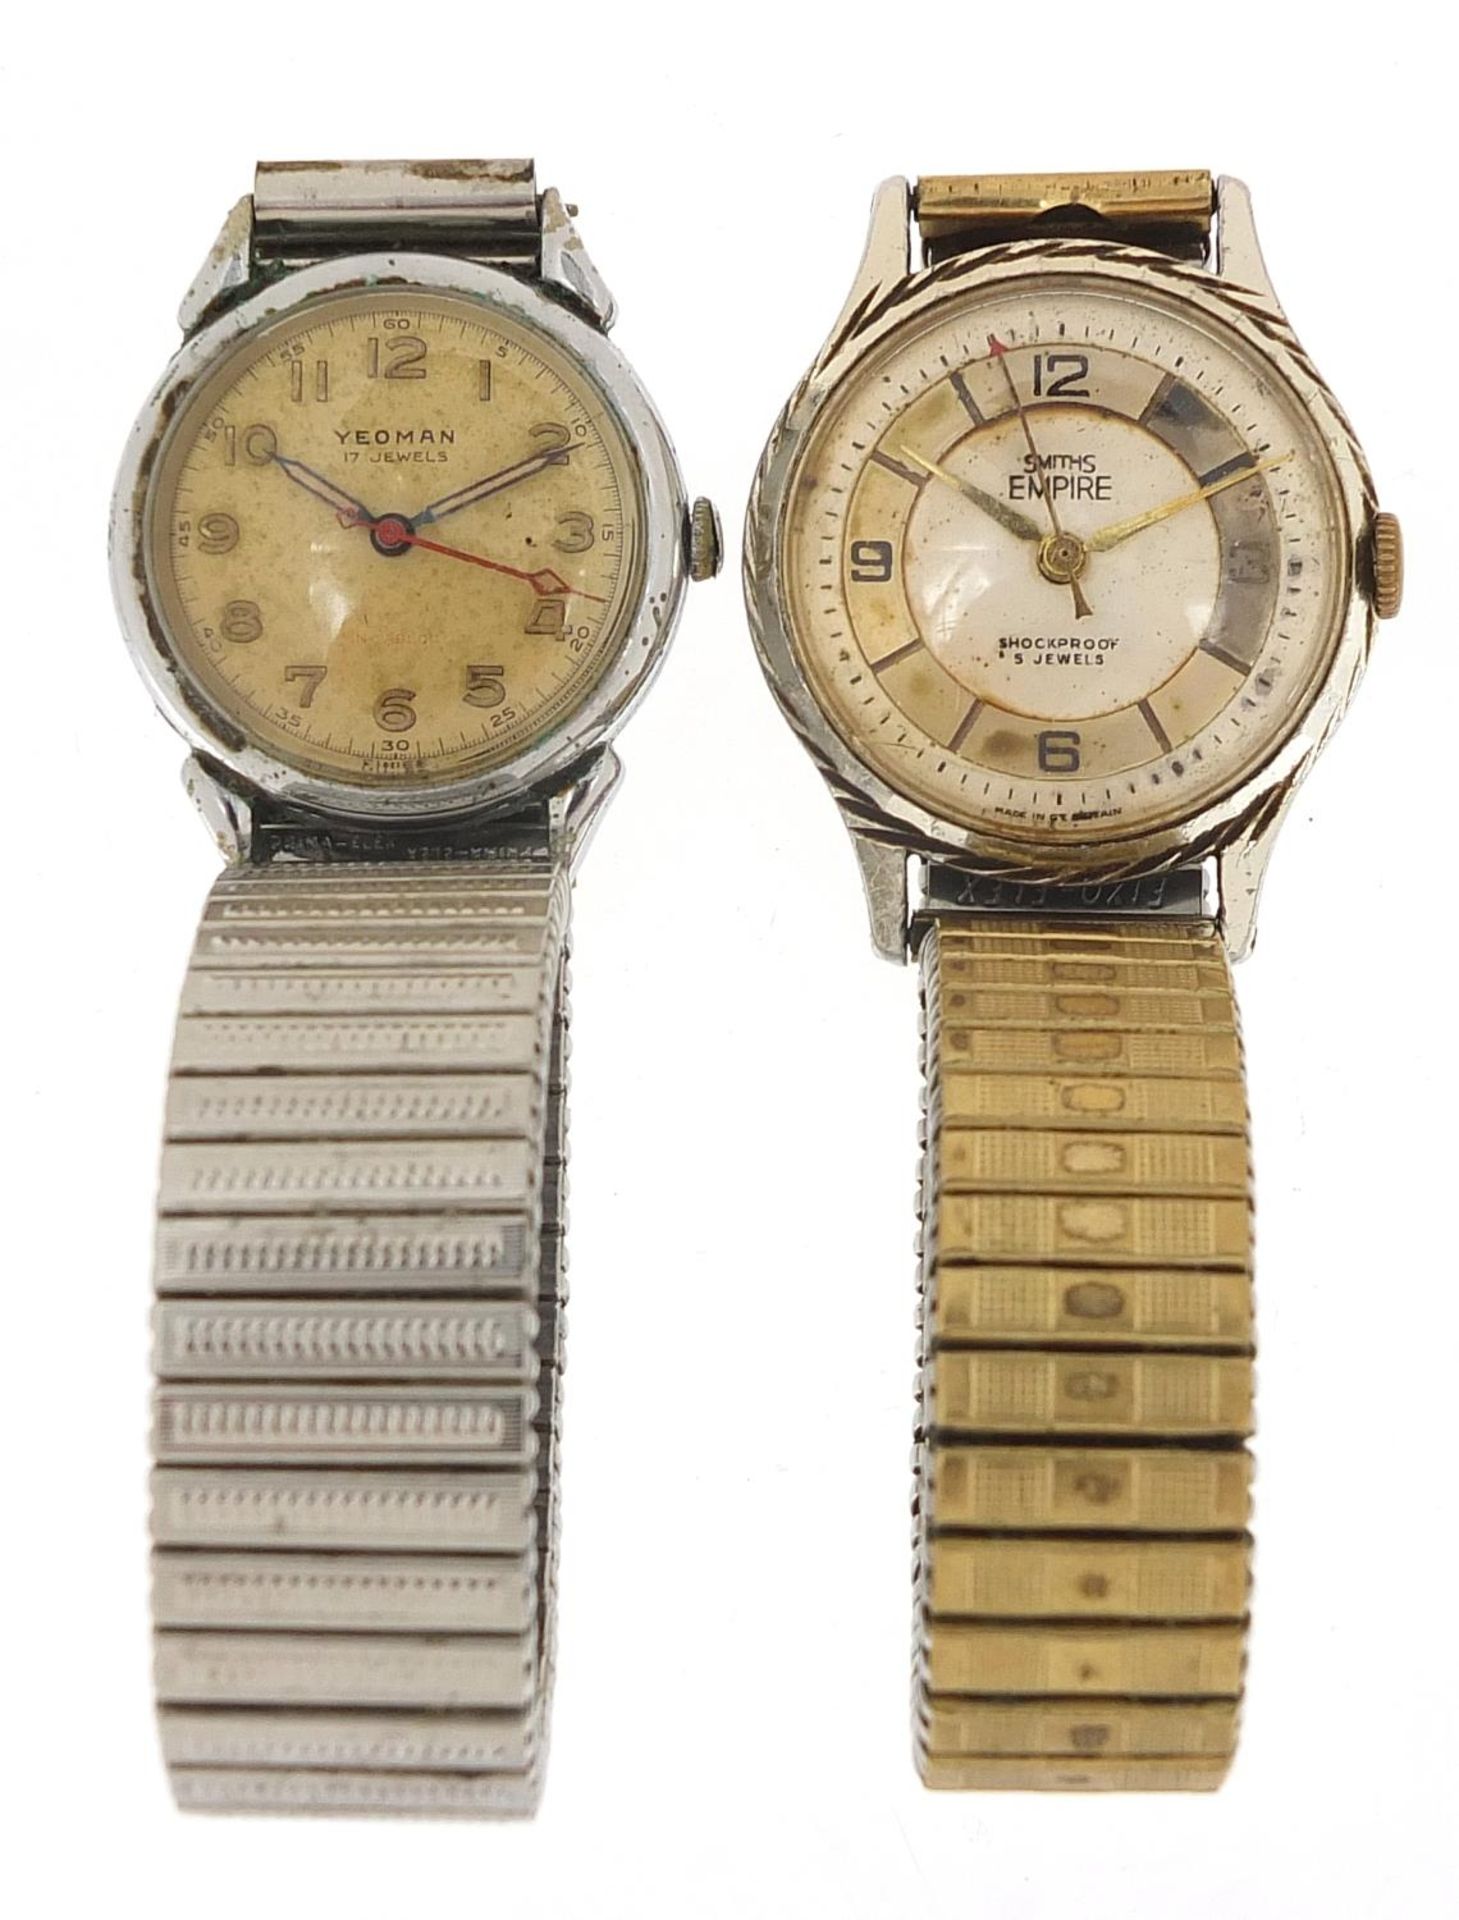 Two vintage gentlemen's wristwatches comprising Smith's Empire and Yedman, 30mm and 33mm in diameter - Image 2 of 3